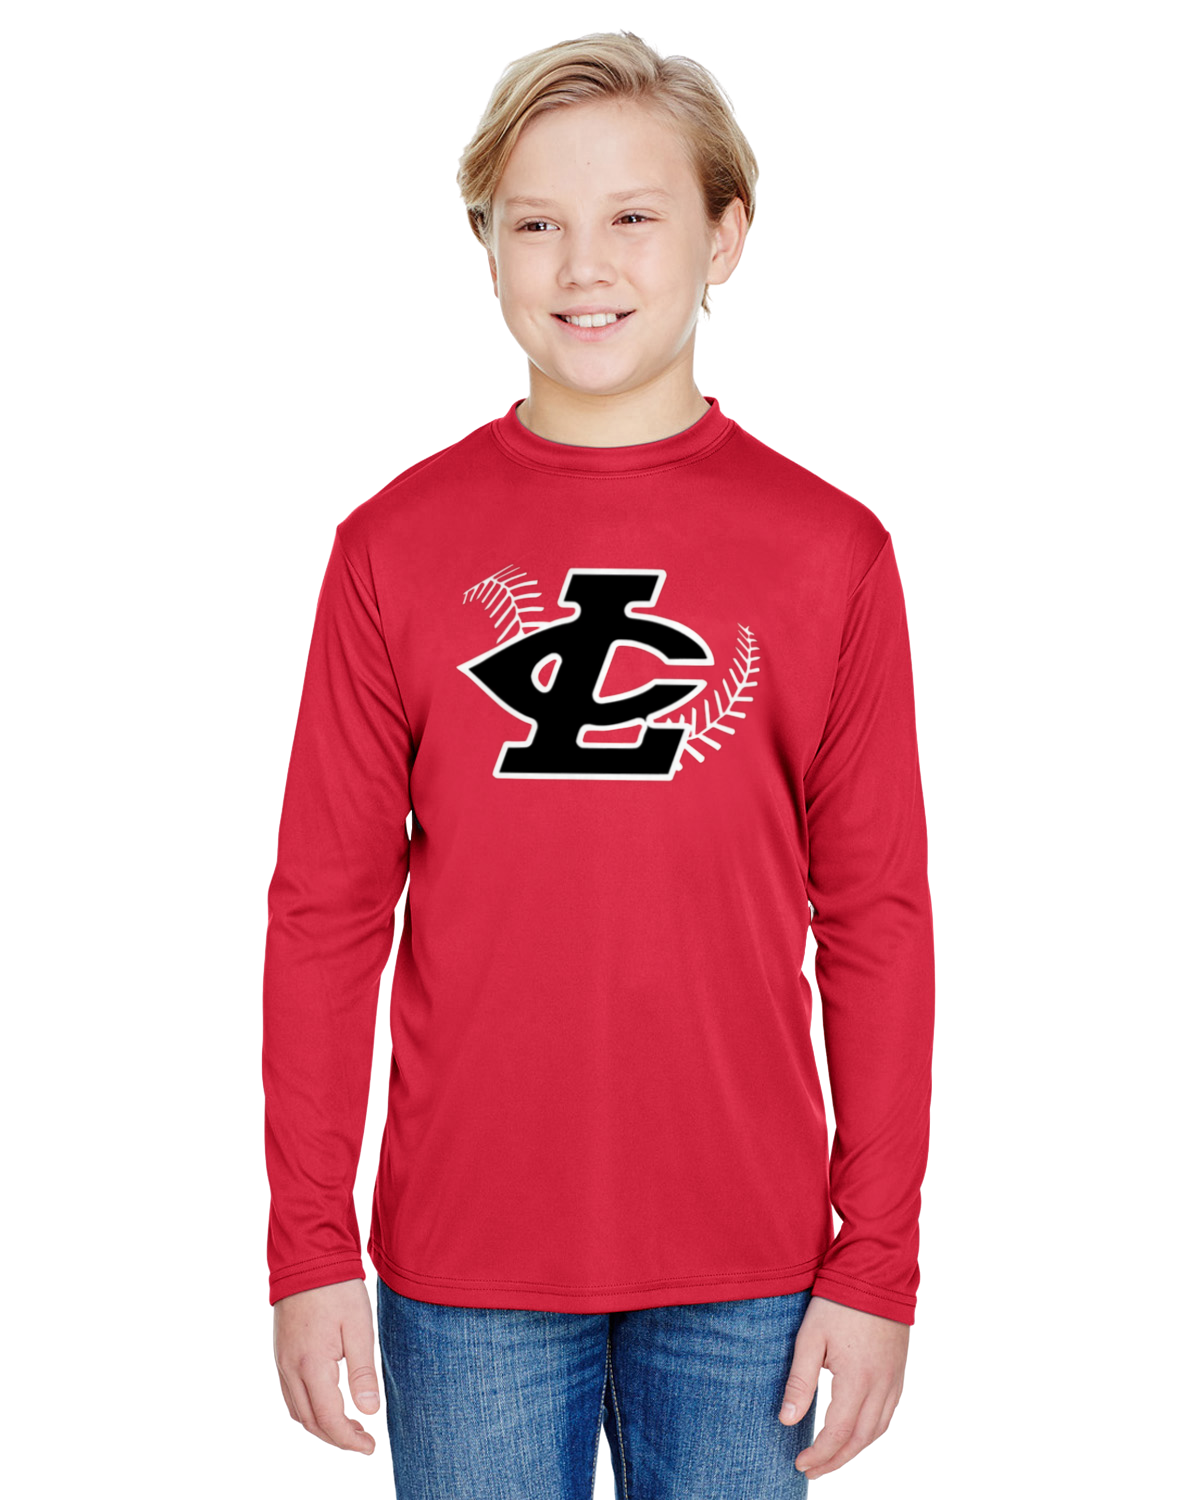 CLLL A4 Youth Cooling Performance Long Sleeve T-Shirt RED